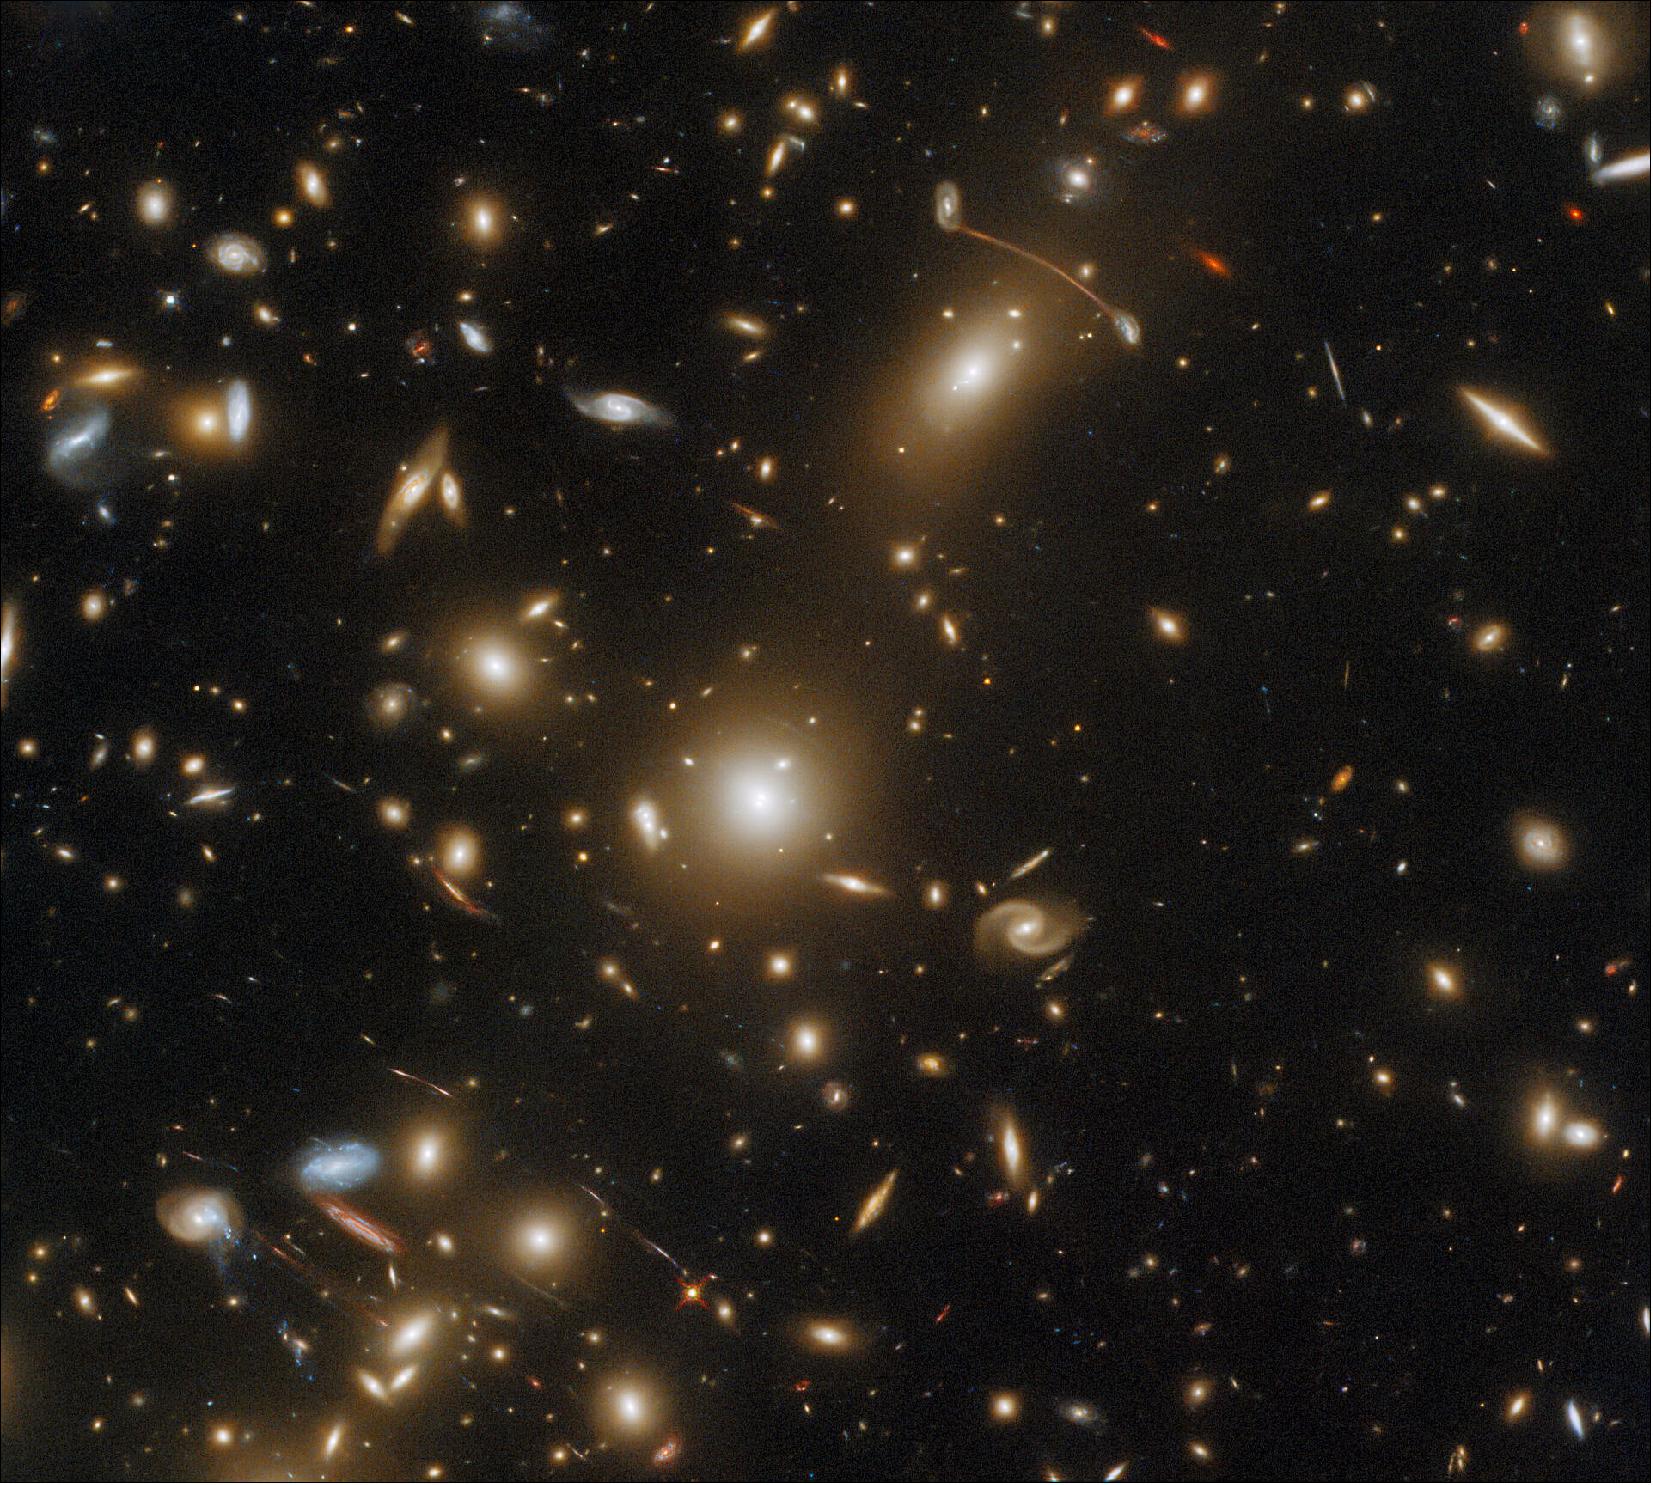 Figure 15: This image is filled with streaks of light, which are actually the images of distant galaxies. The streaks are the result of gravitational lensing, an astrophysical phenomenon that occurs when a massive celestial body such as a galaxy cluster distorts spacetime sufficiently strongly to affect the path of light passing through it — almost as if the light were passing through a gigantic lens. Gravitational lensing comes in two varieties — strong and weak — and both can give astronomers an insight into the distribution of mass within a lensing galaxy cluster such as Abell 1351 (image credit: ESA/Hubble & NASA, H. Ebeling; Acknowledgement: L. Shatz; CC BY 4.0)